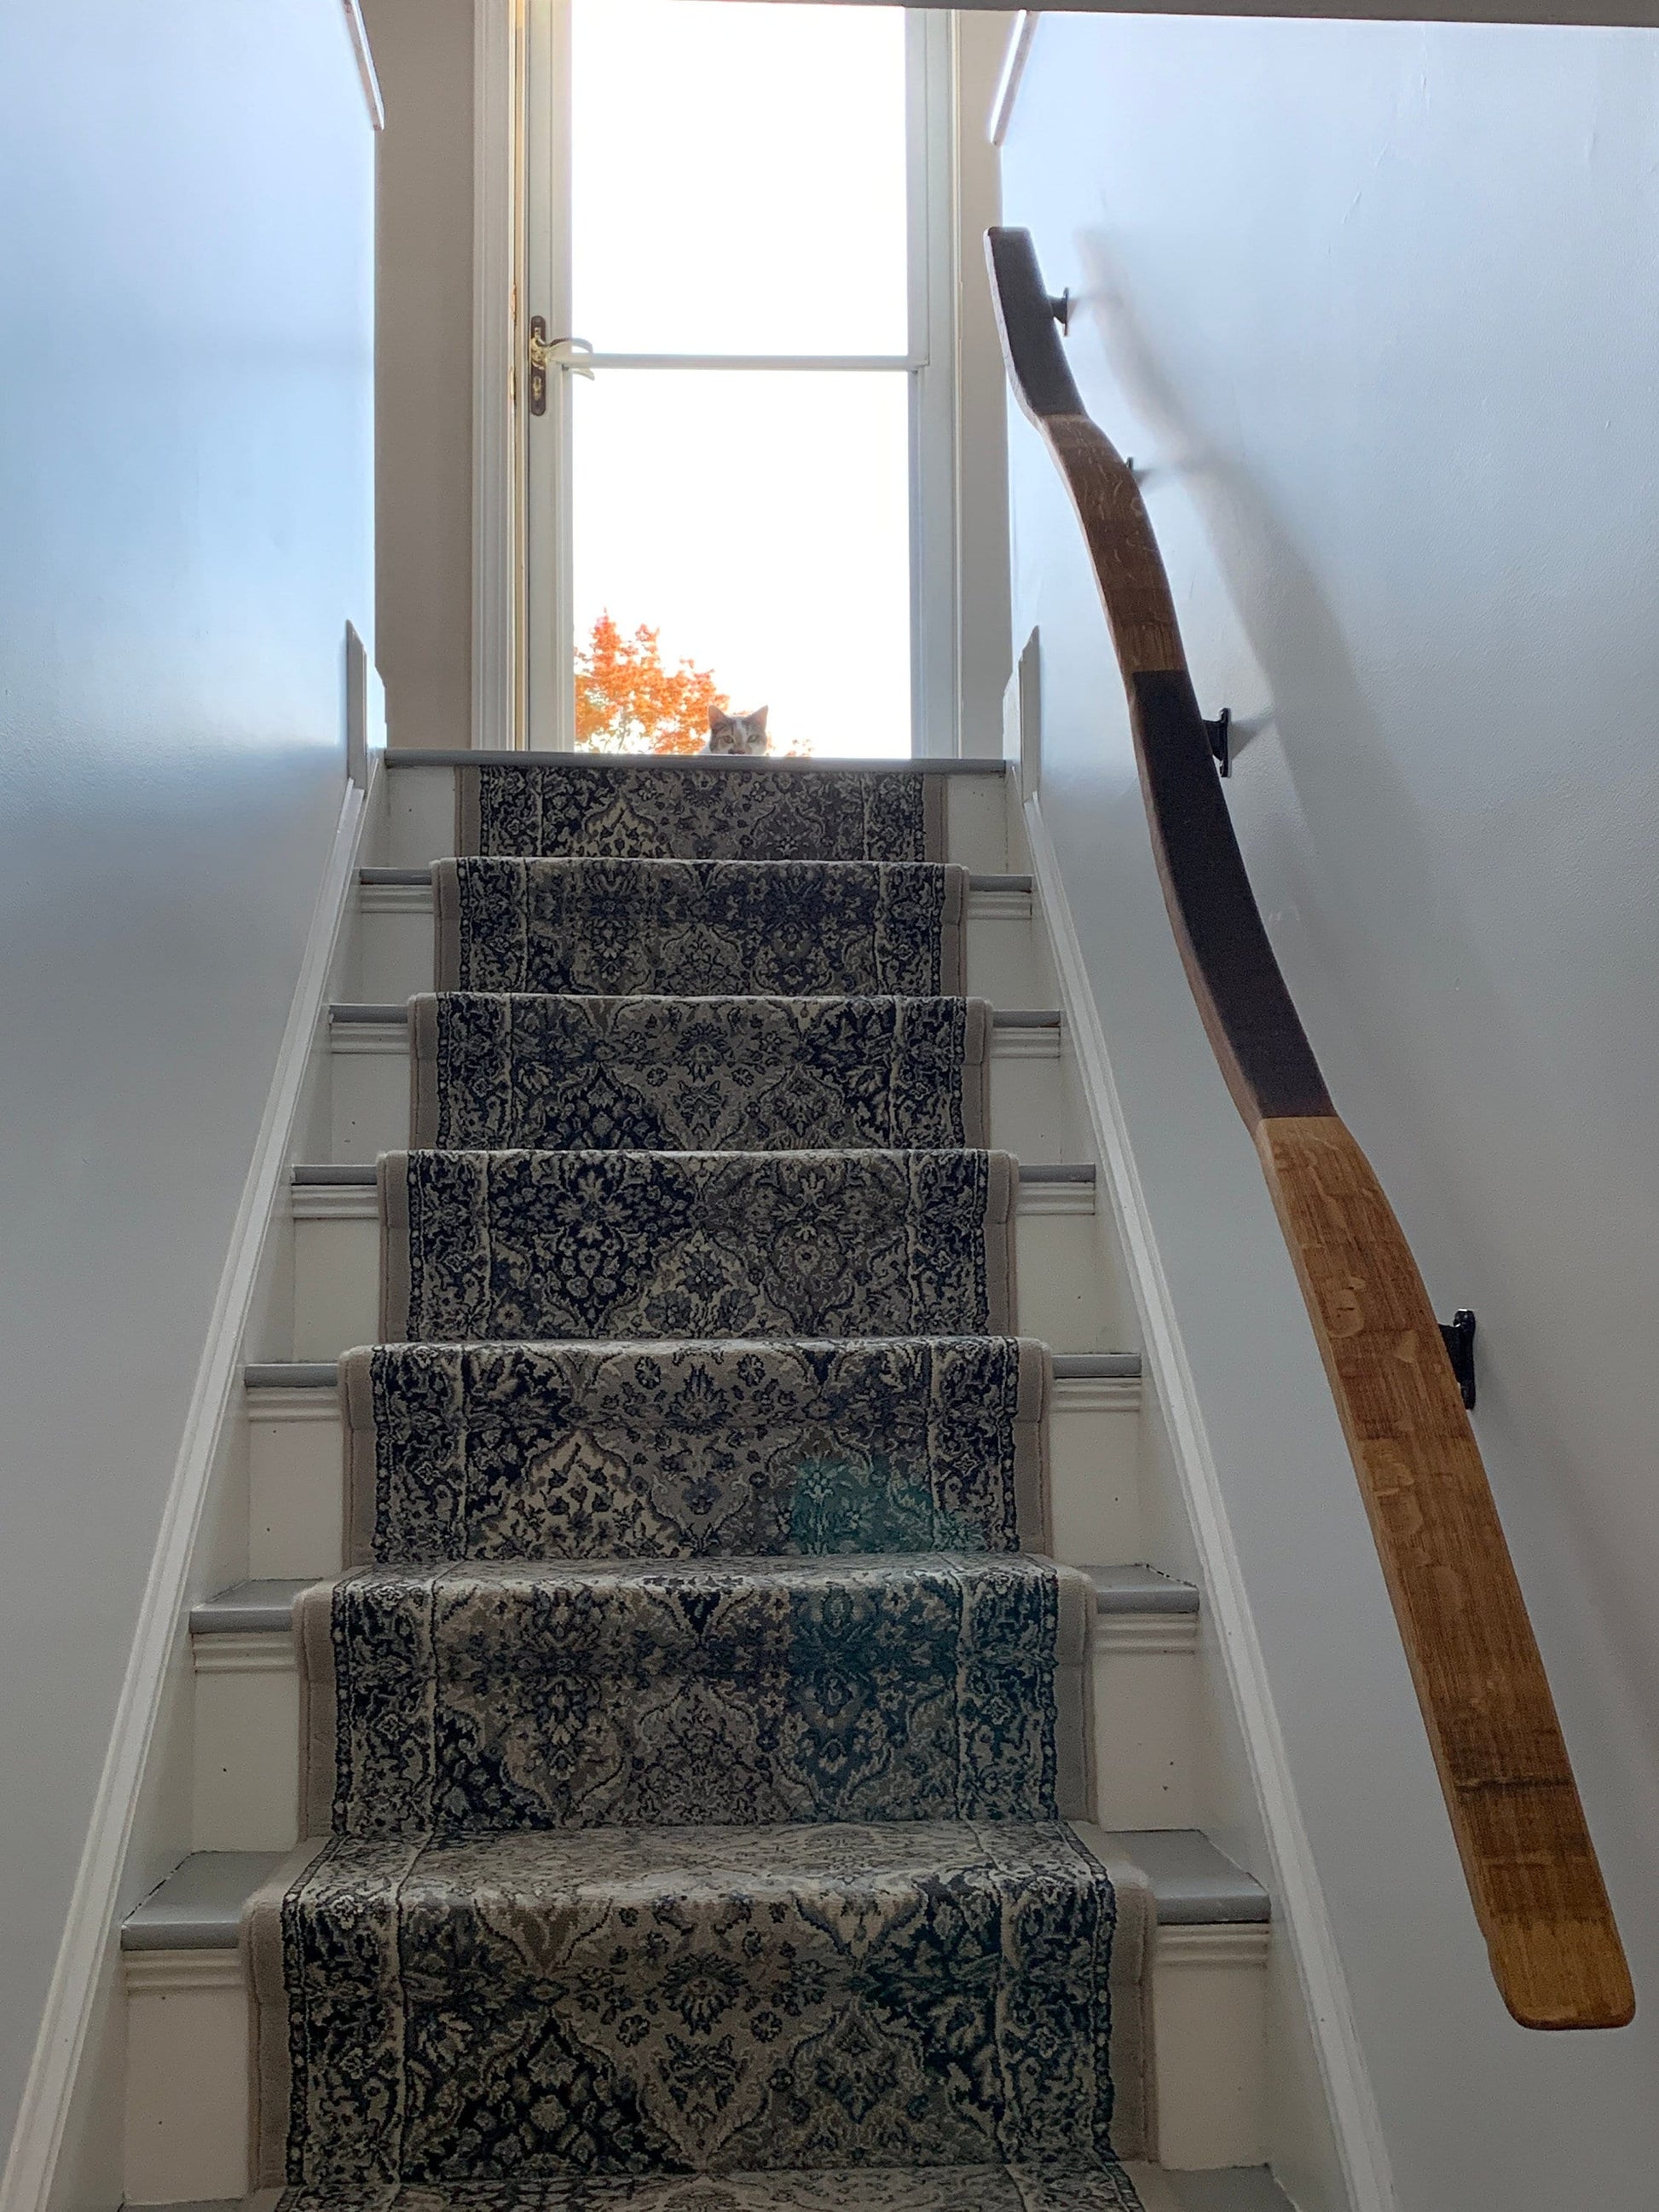 Whiskey Barrel Stair Handrails - Visky - Made from retired Whiskey Barrels 100% Recycled!